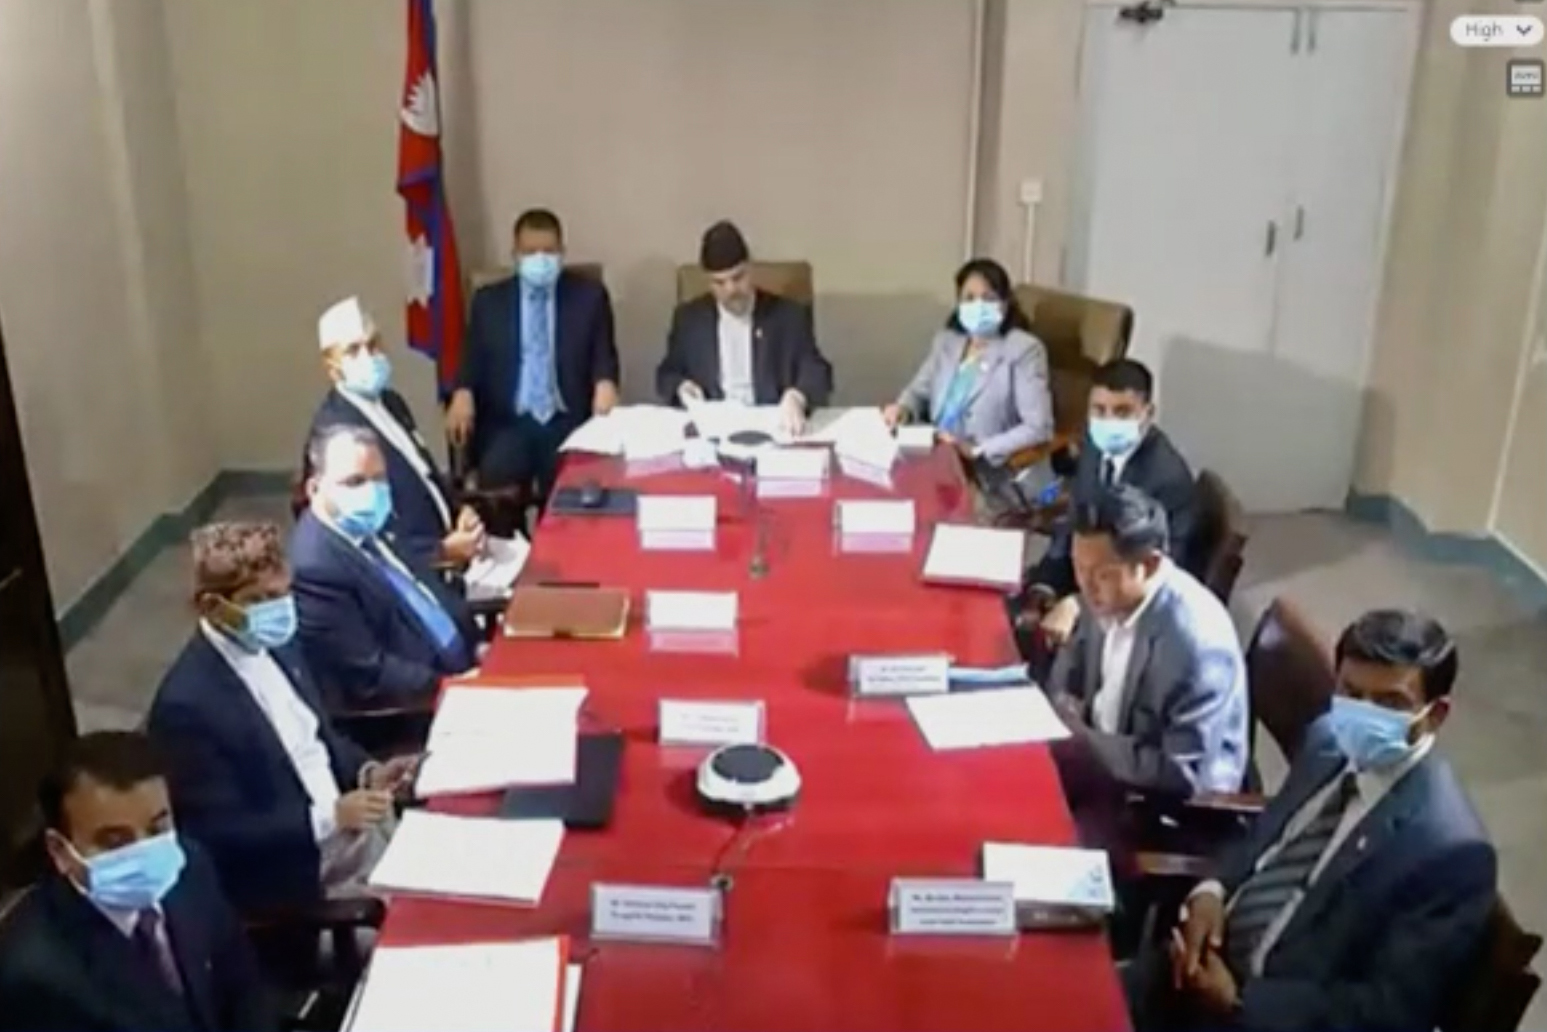 The Nepali delegation presented the country's VNR.